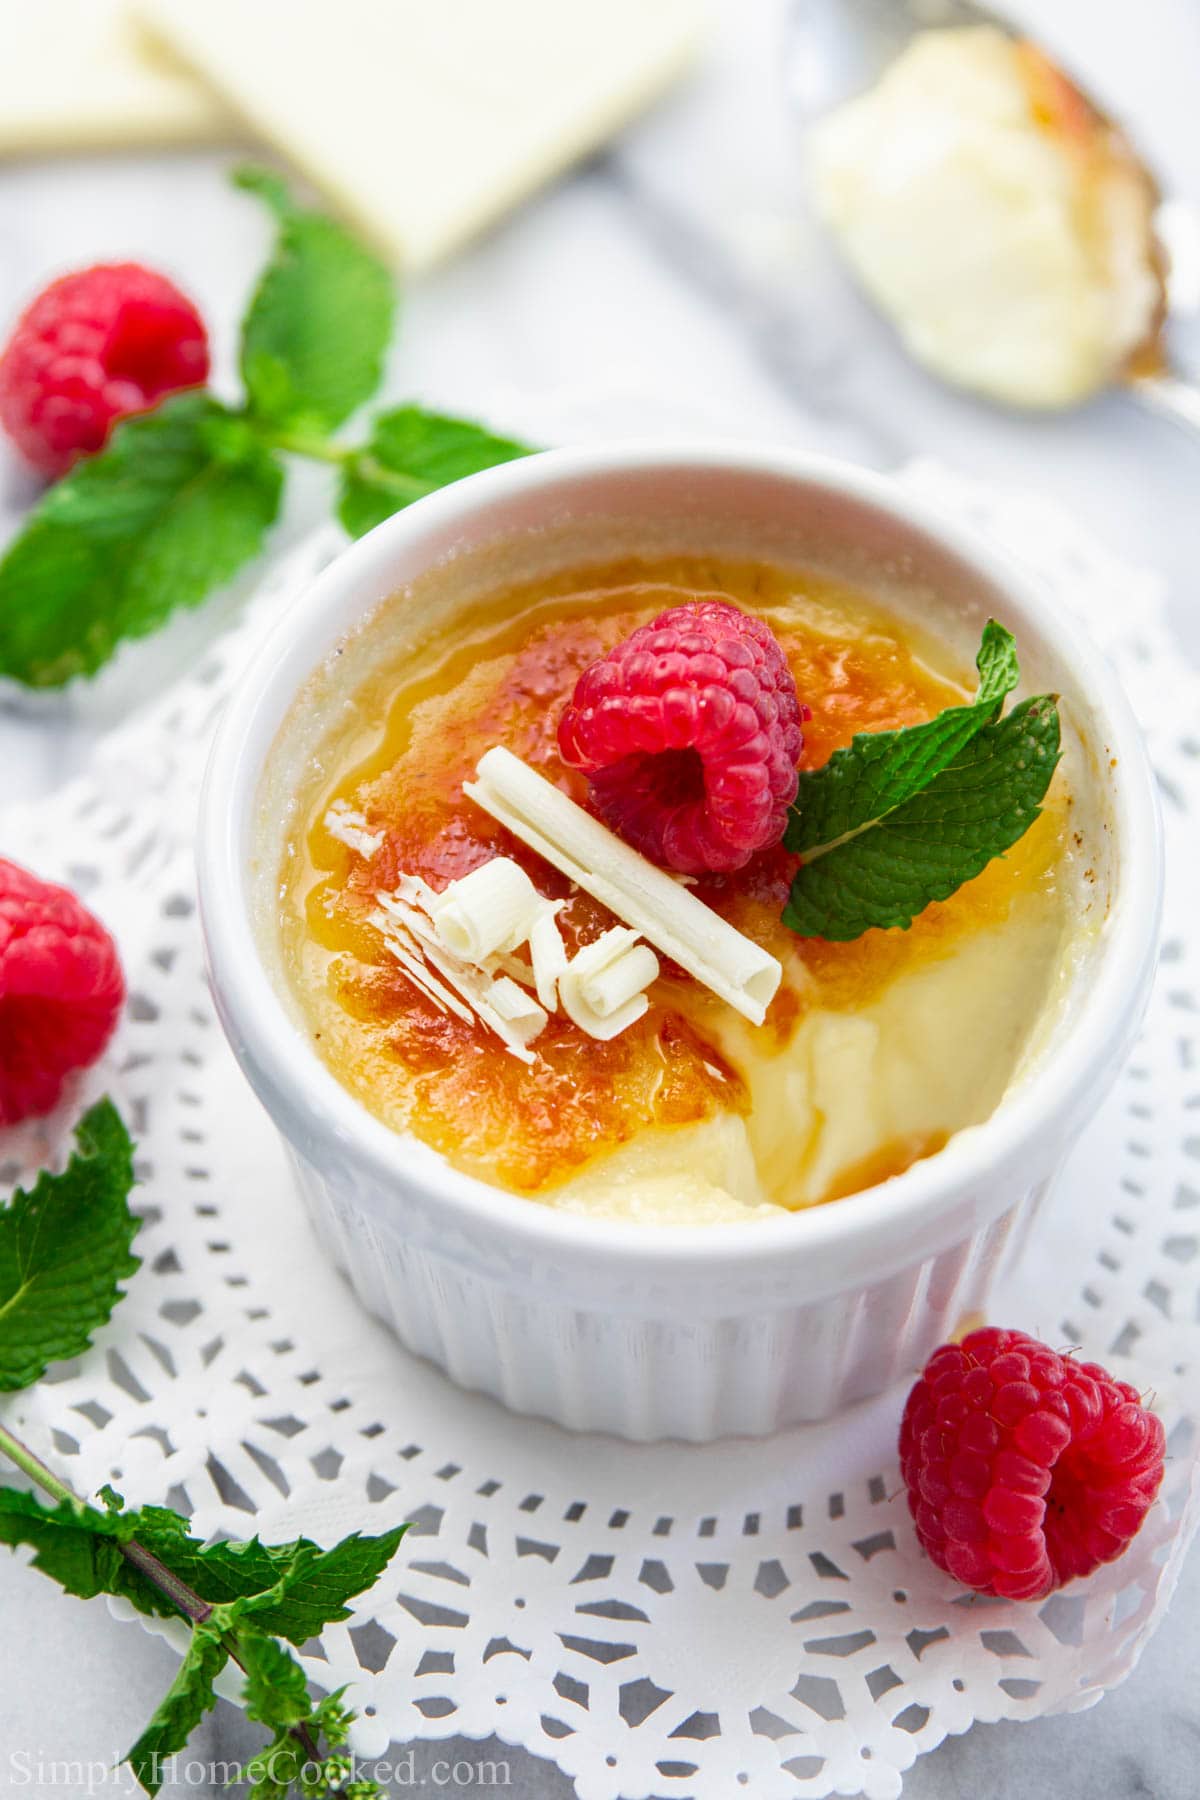 White Chocolate Creme Brulee in a ramekin and topped with white chocolate shavings, mint leaf, and raspberries